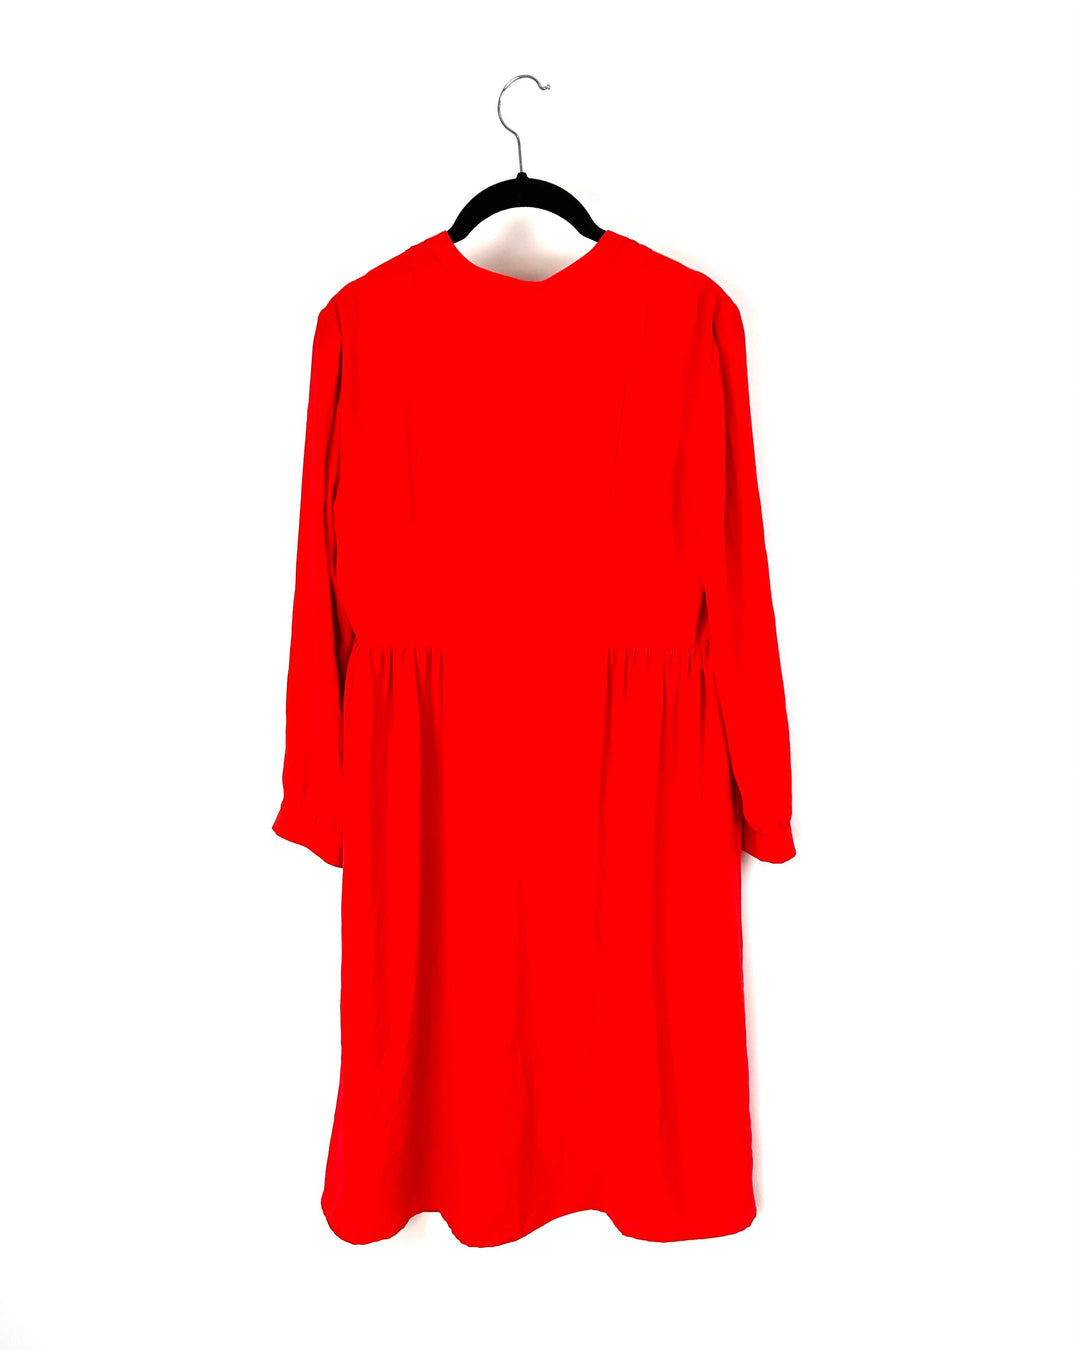 Red Long Sleeve Dress - Size 6-8